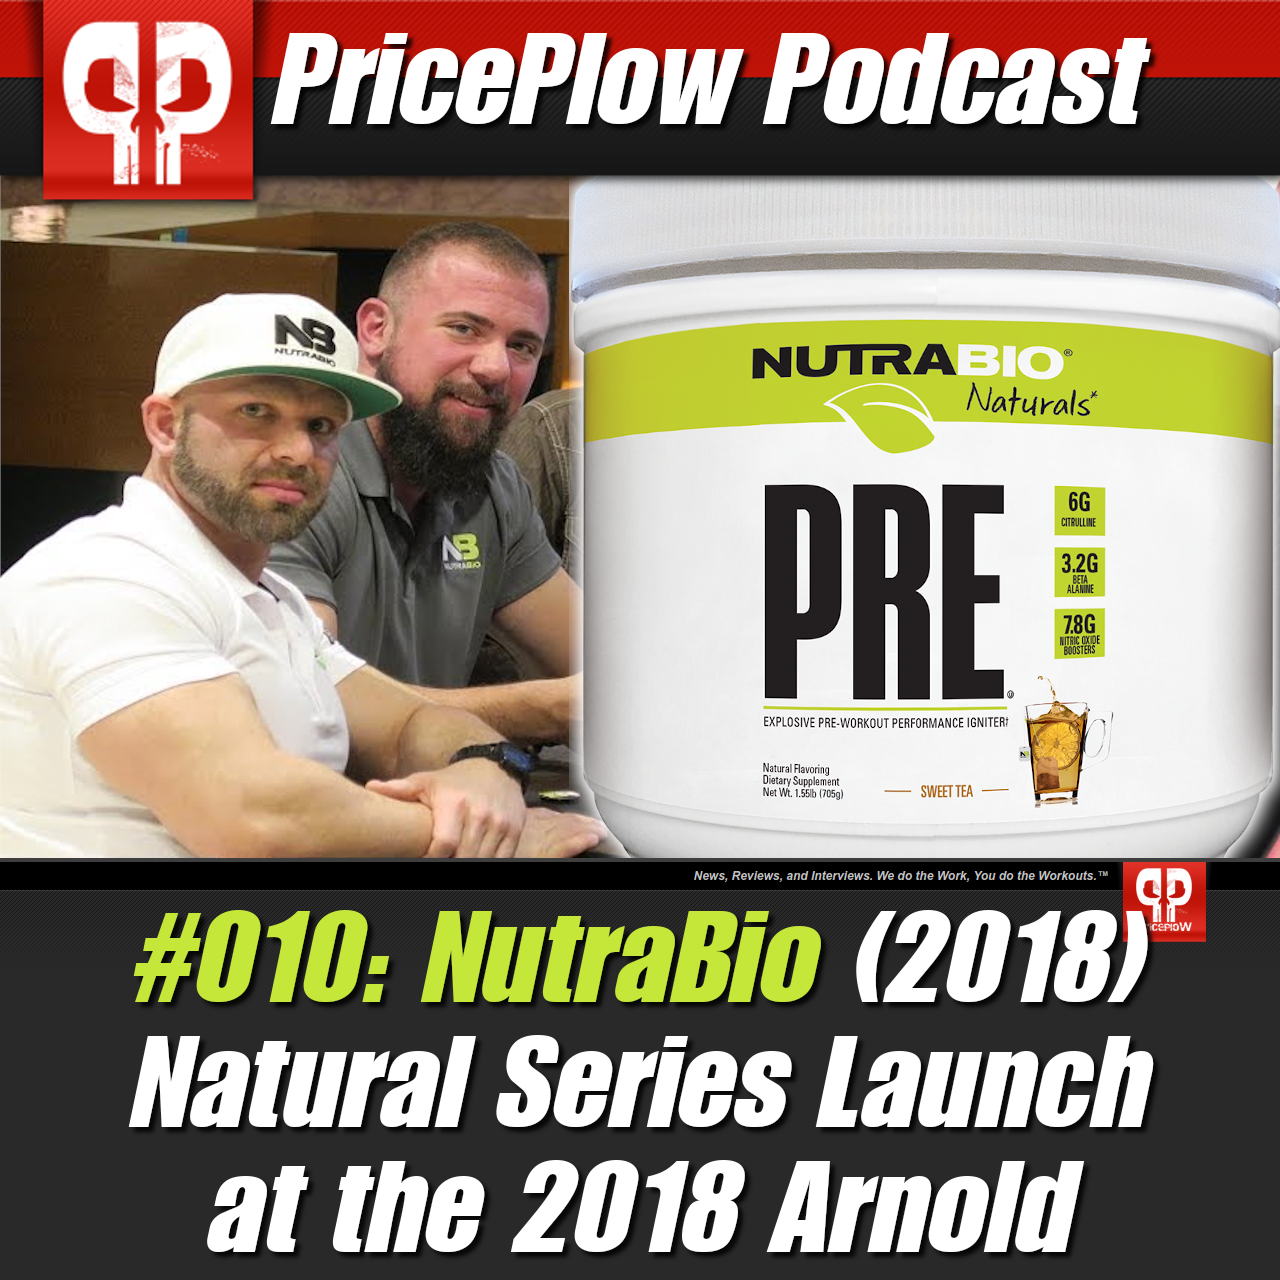 PricePlow Podcast #010: NutraBio Natural Series Launch at the 2018 Arnold Sports Festival